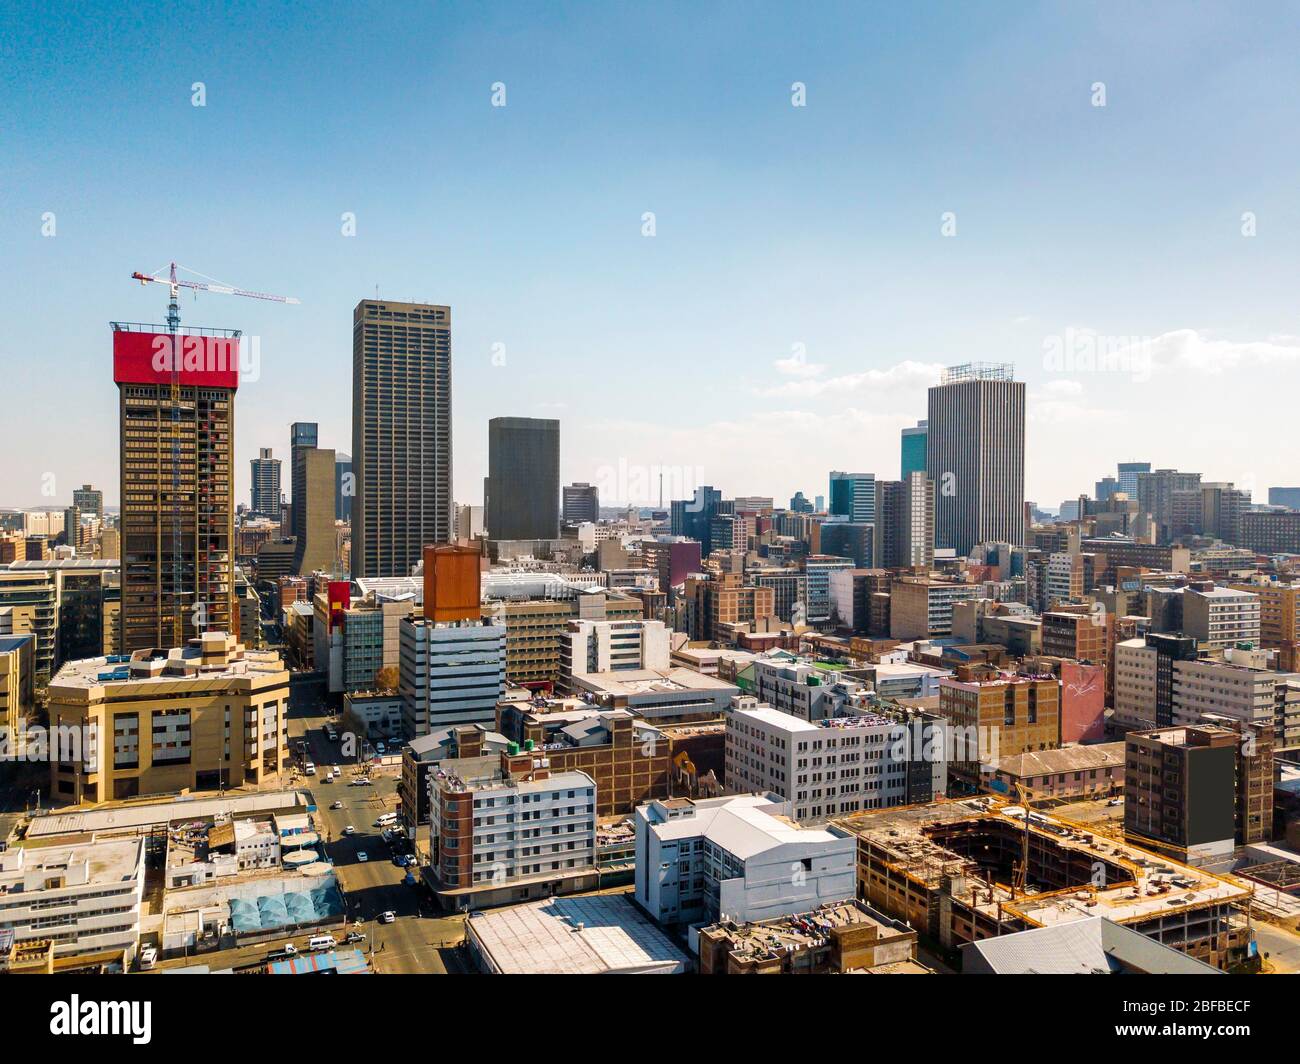 Downtown of Johannesburg, South Africa Stock Photo